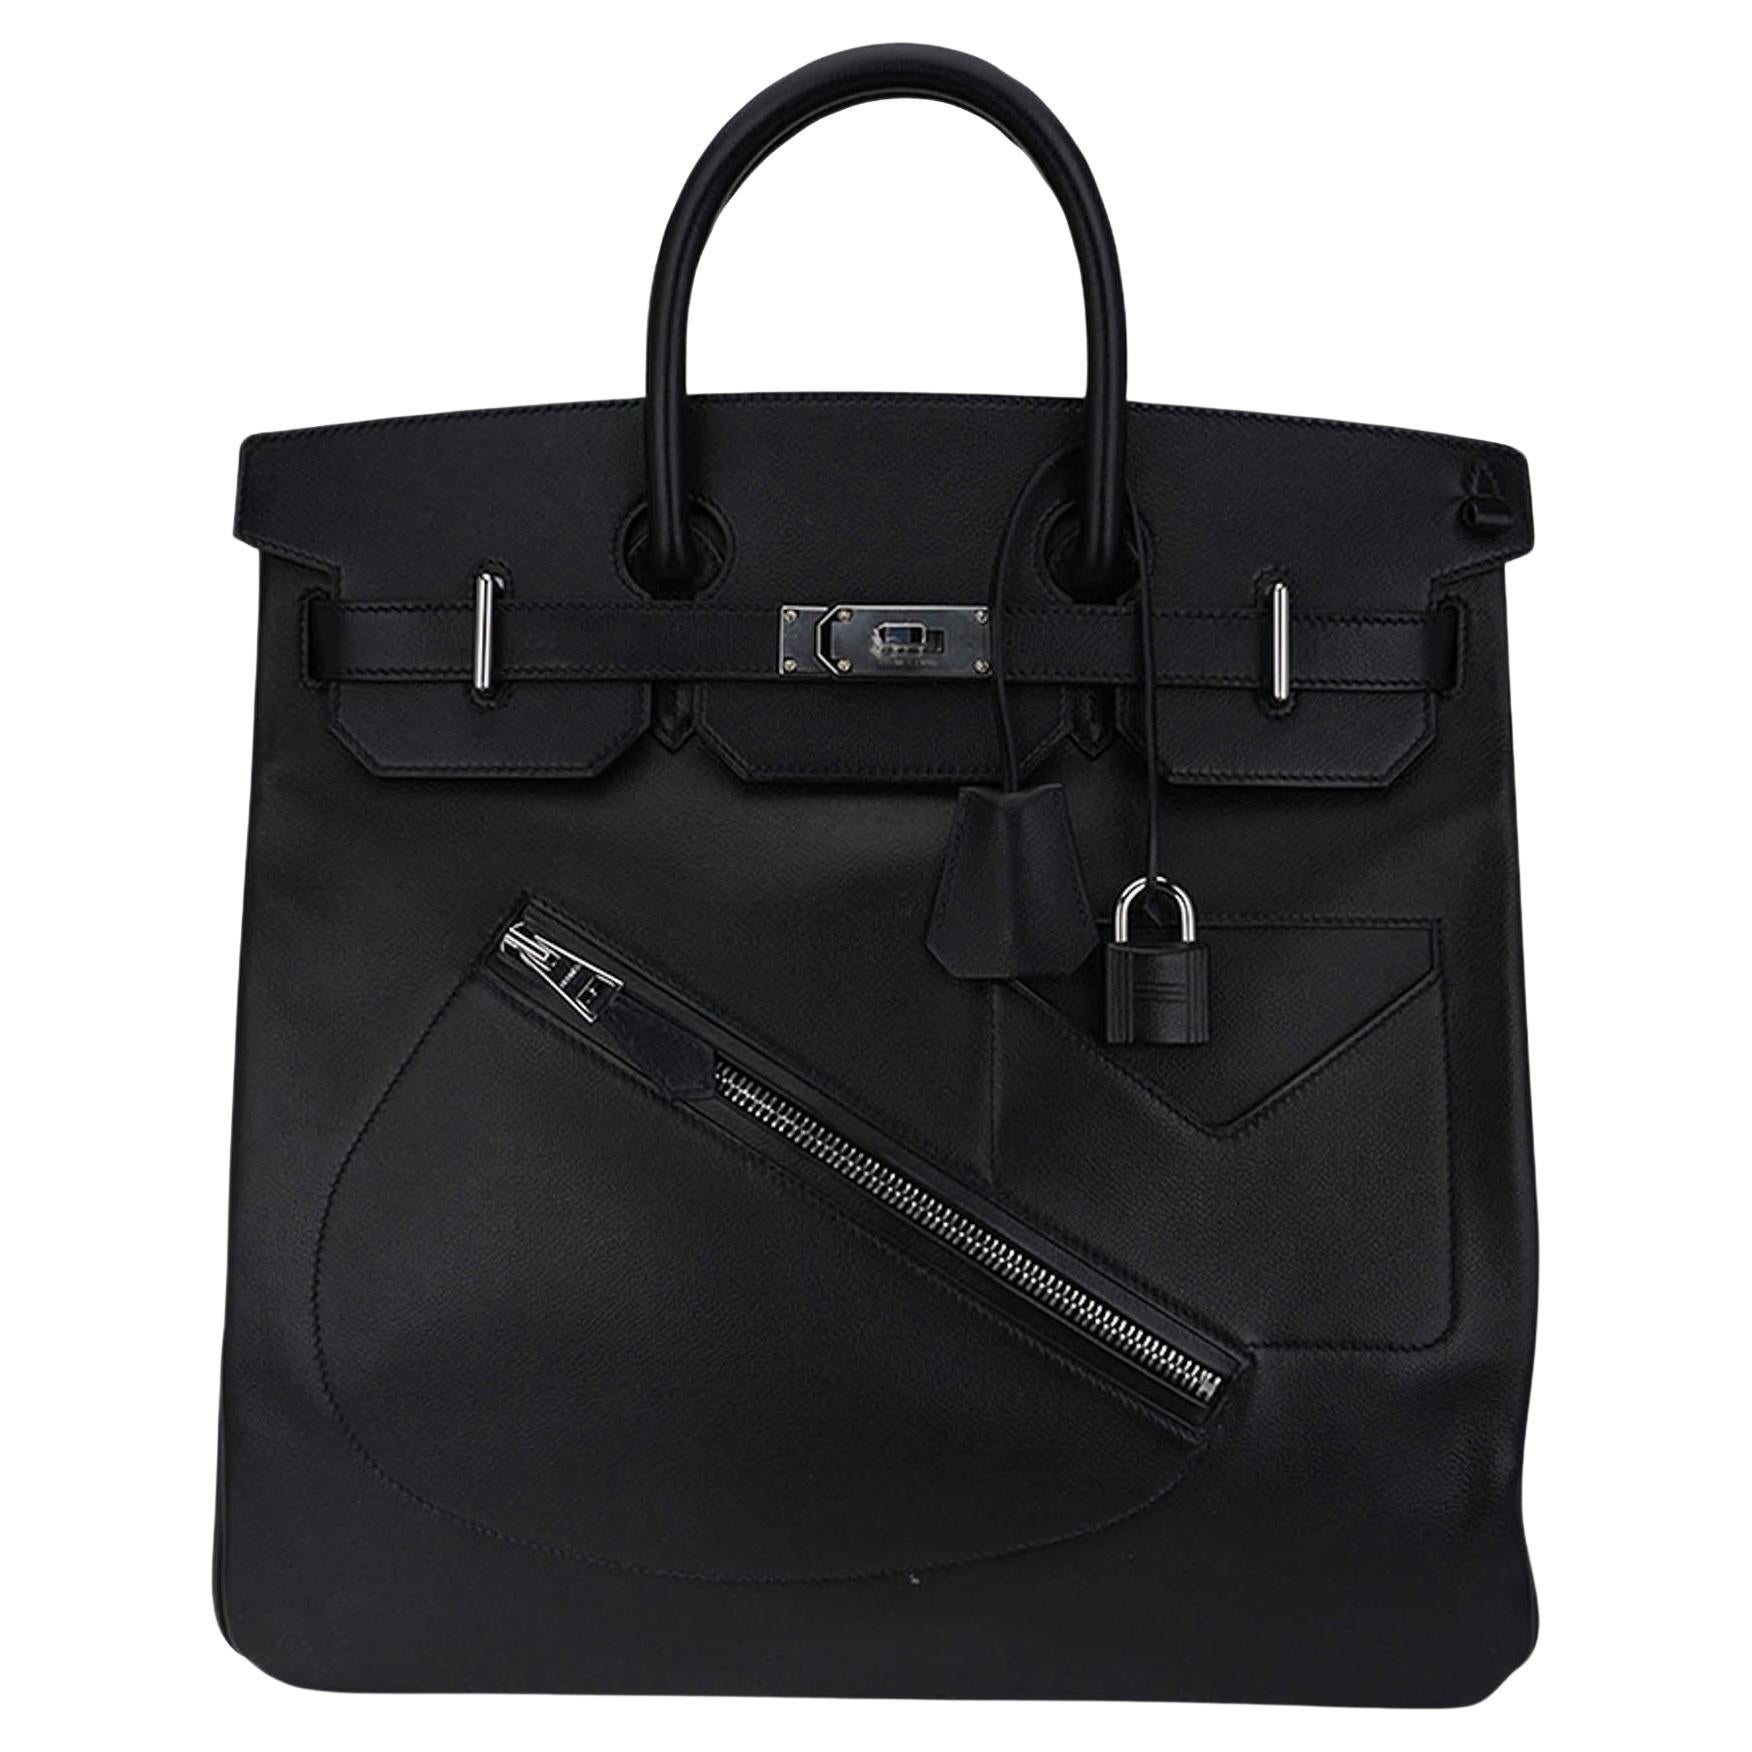 Fashionphile - If you like the Hermes Kelly, you'll love the Brillant, one  of the most iconic bags from Delvaux. The style comes in PM, MM, and GM  sizes and takes over